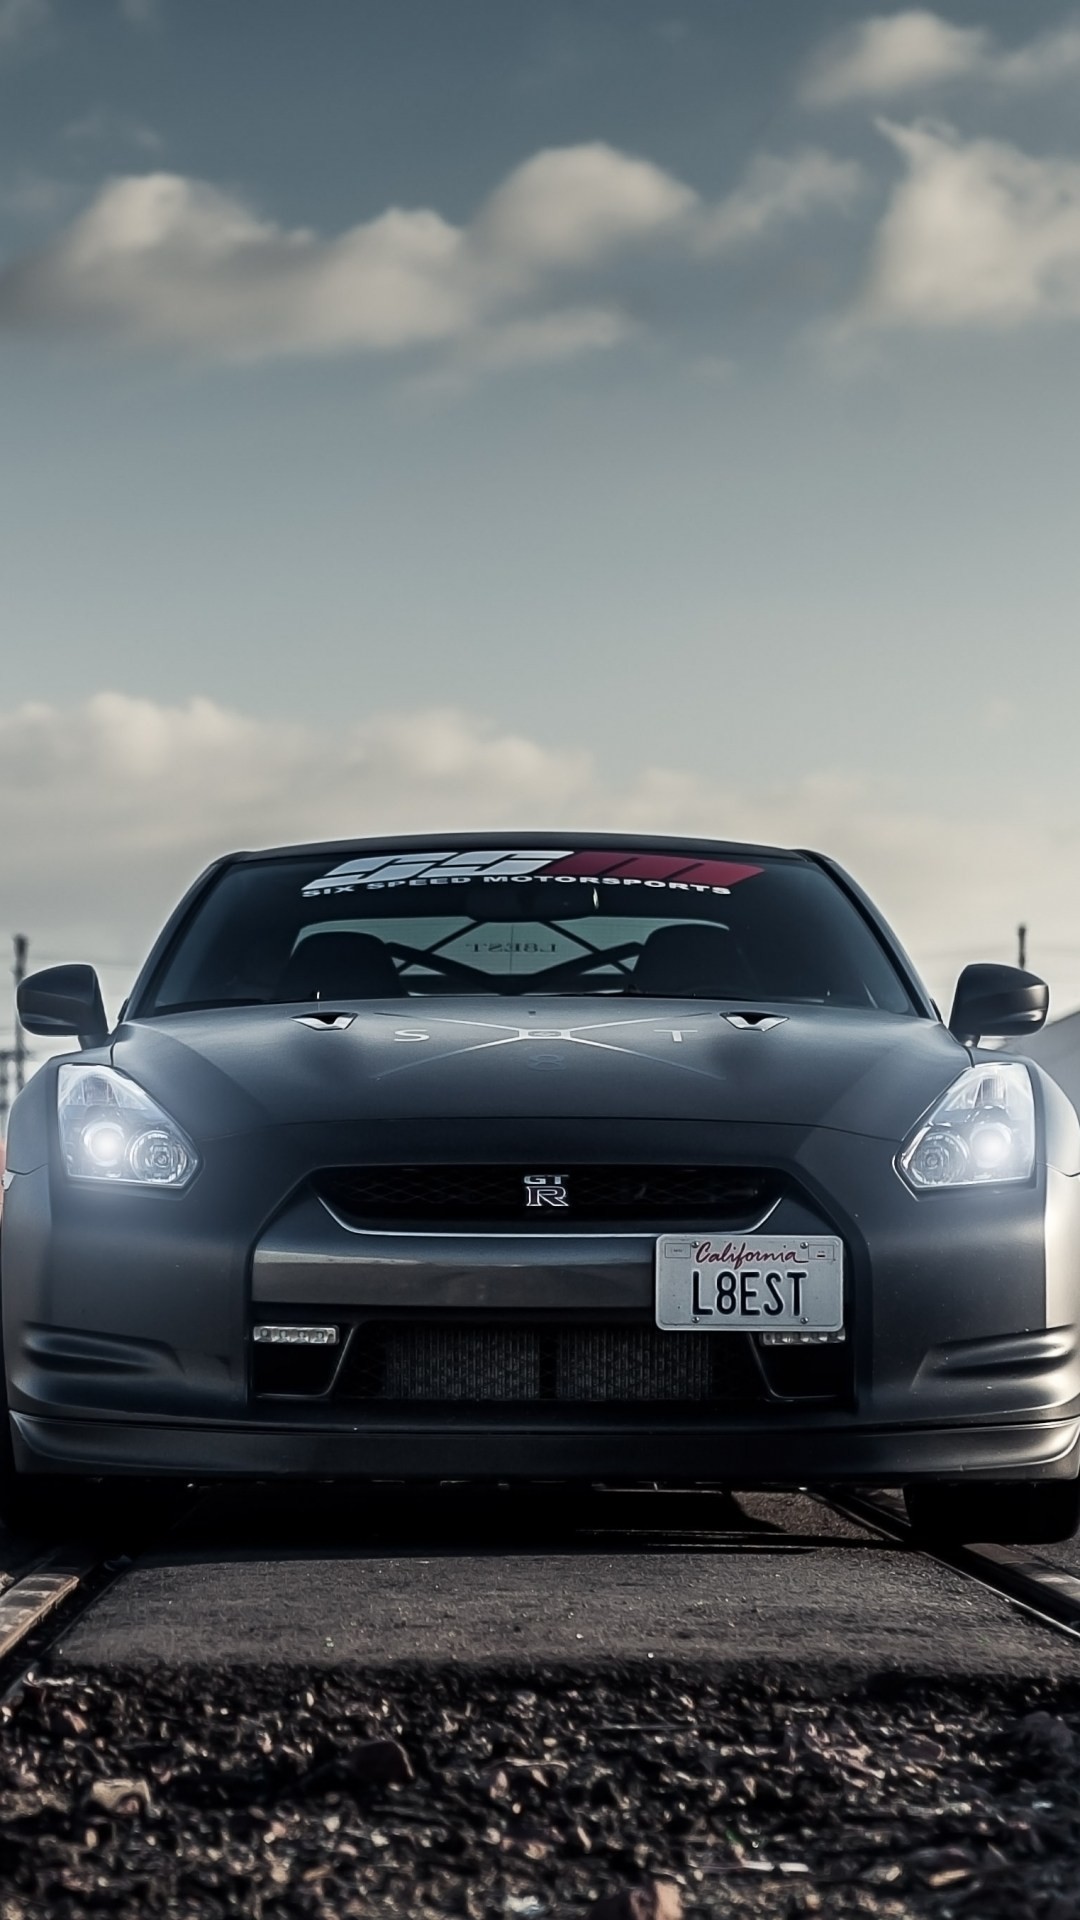 1080x1920 Nissan Gtr Wallpapers For Iphone 7 Plus 6